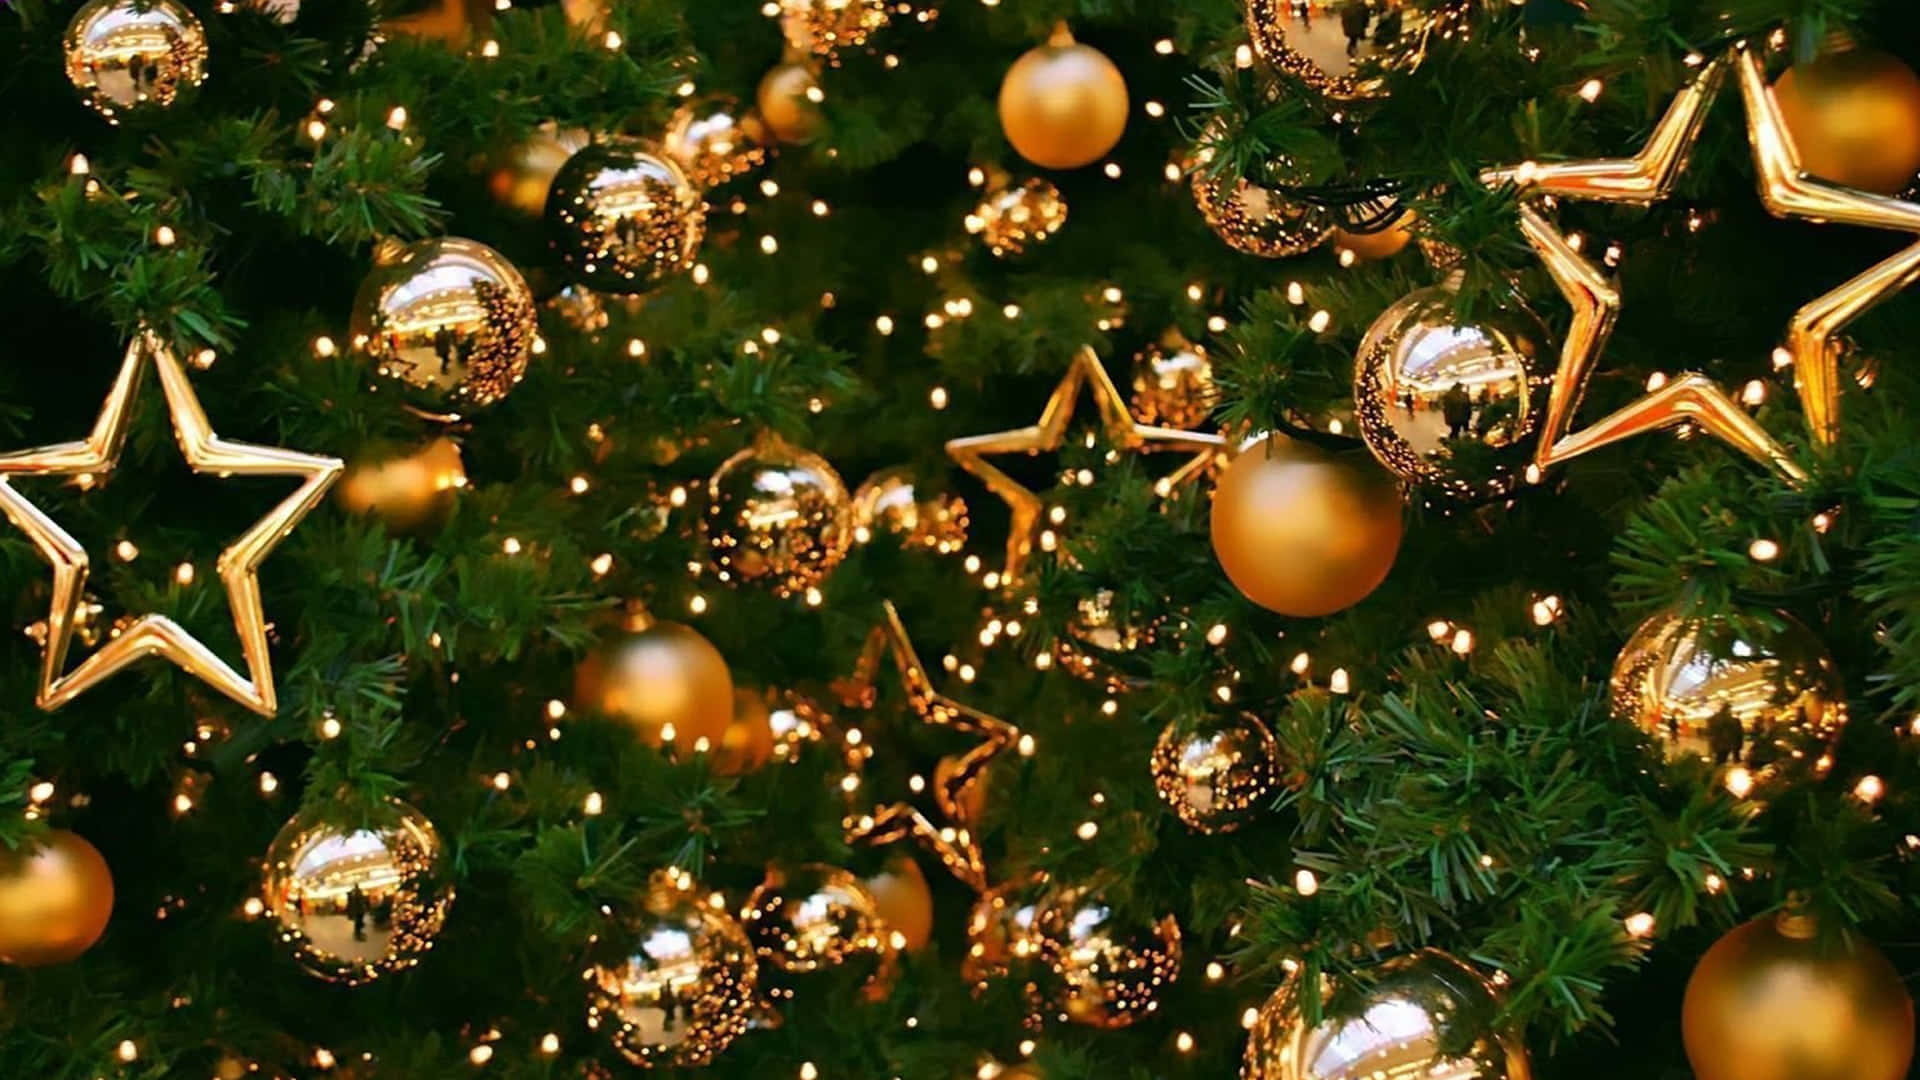 Celebrate this holiday season with a festive gold Christmas background